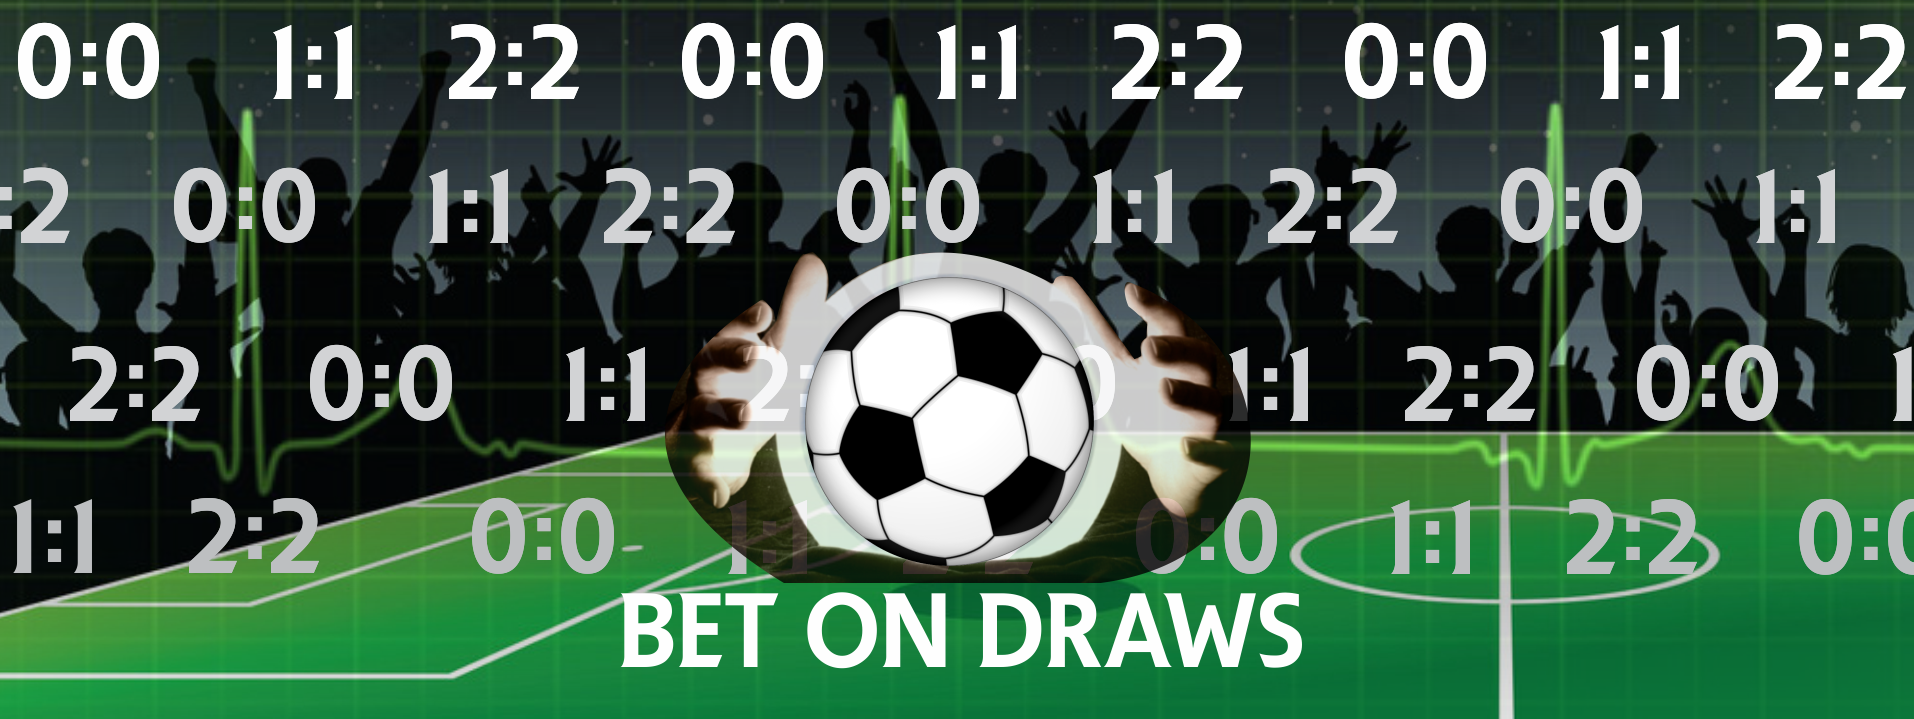 Welcome To BetOnDraws Soccer Prediction Site